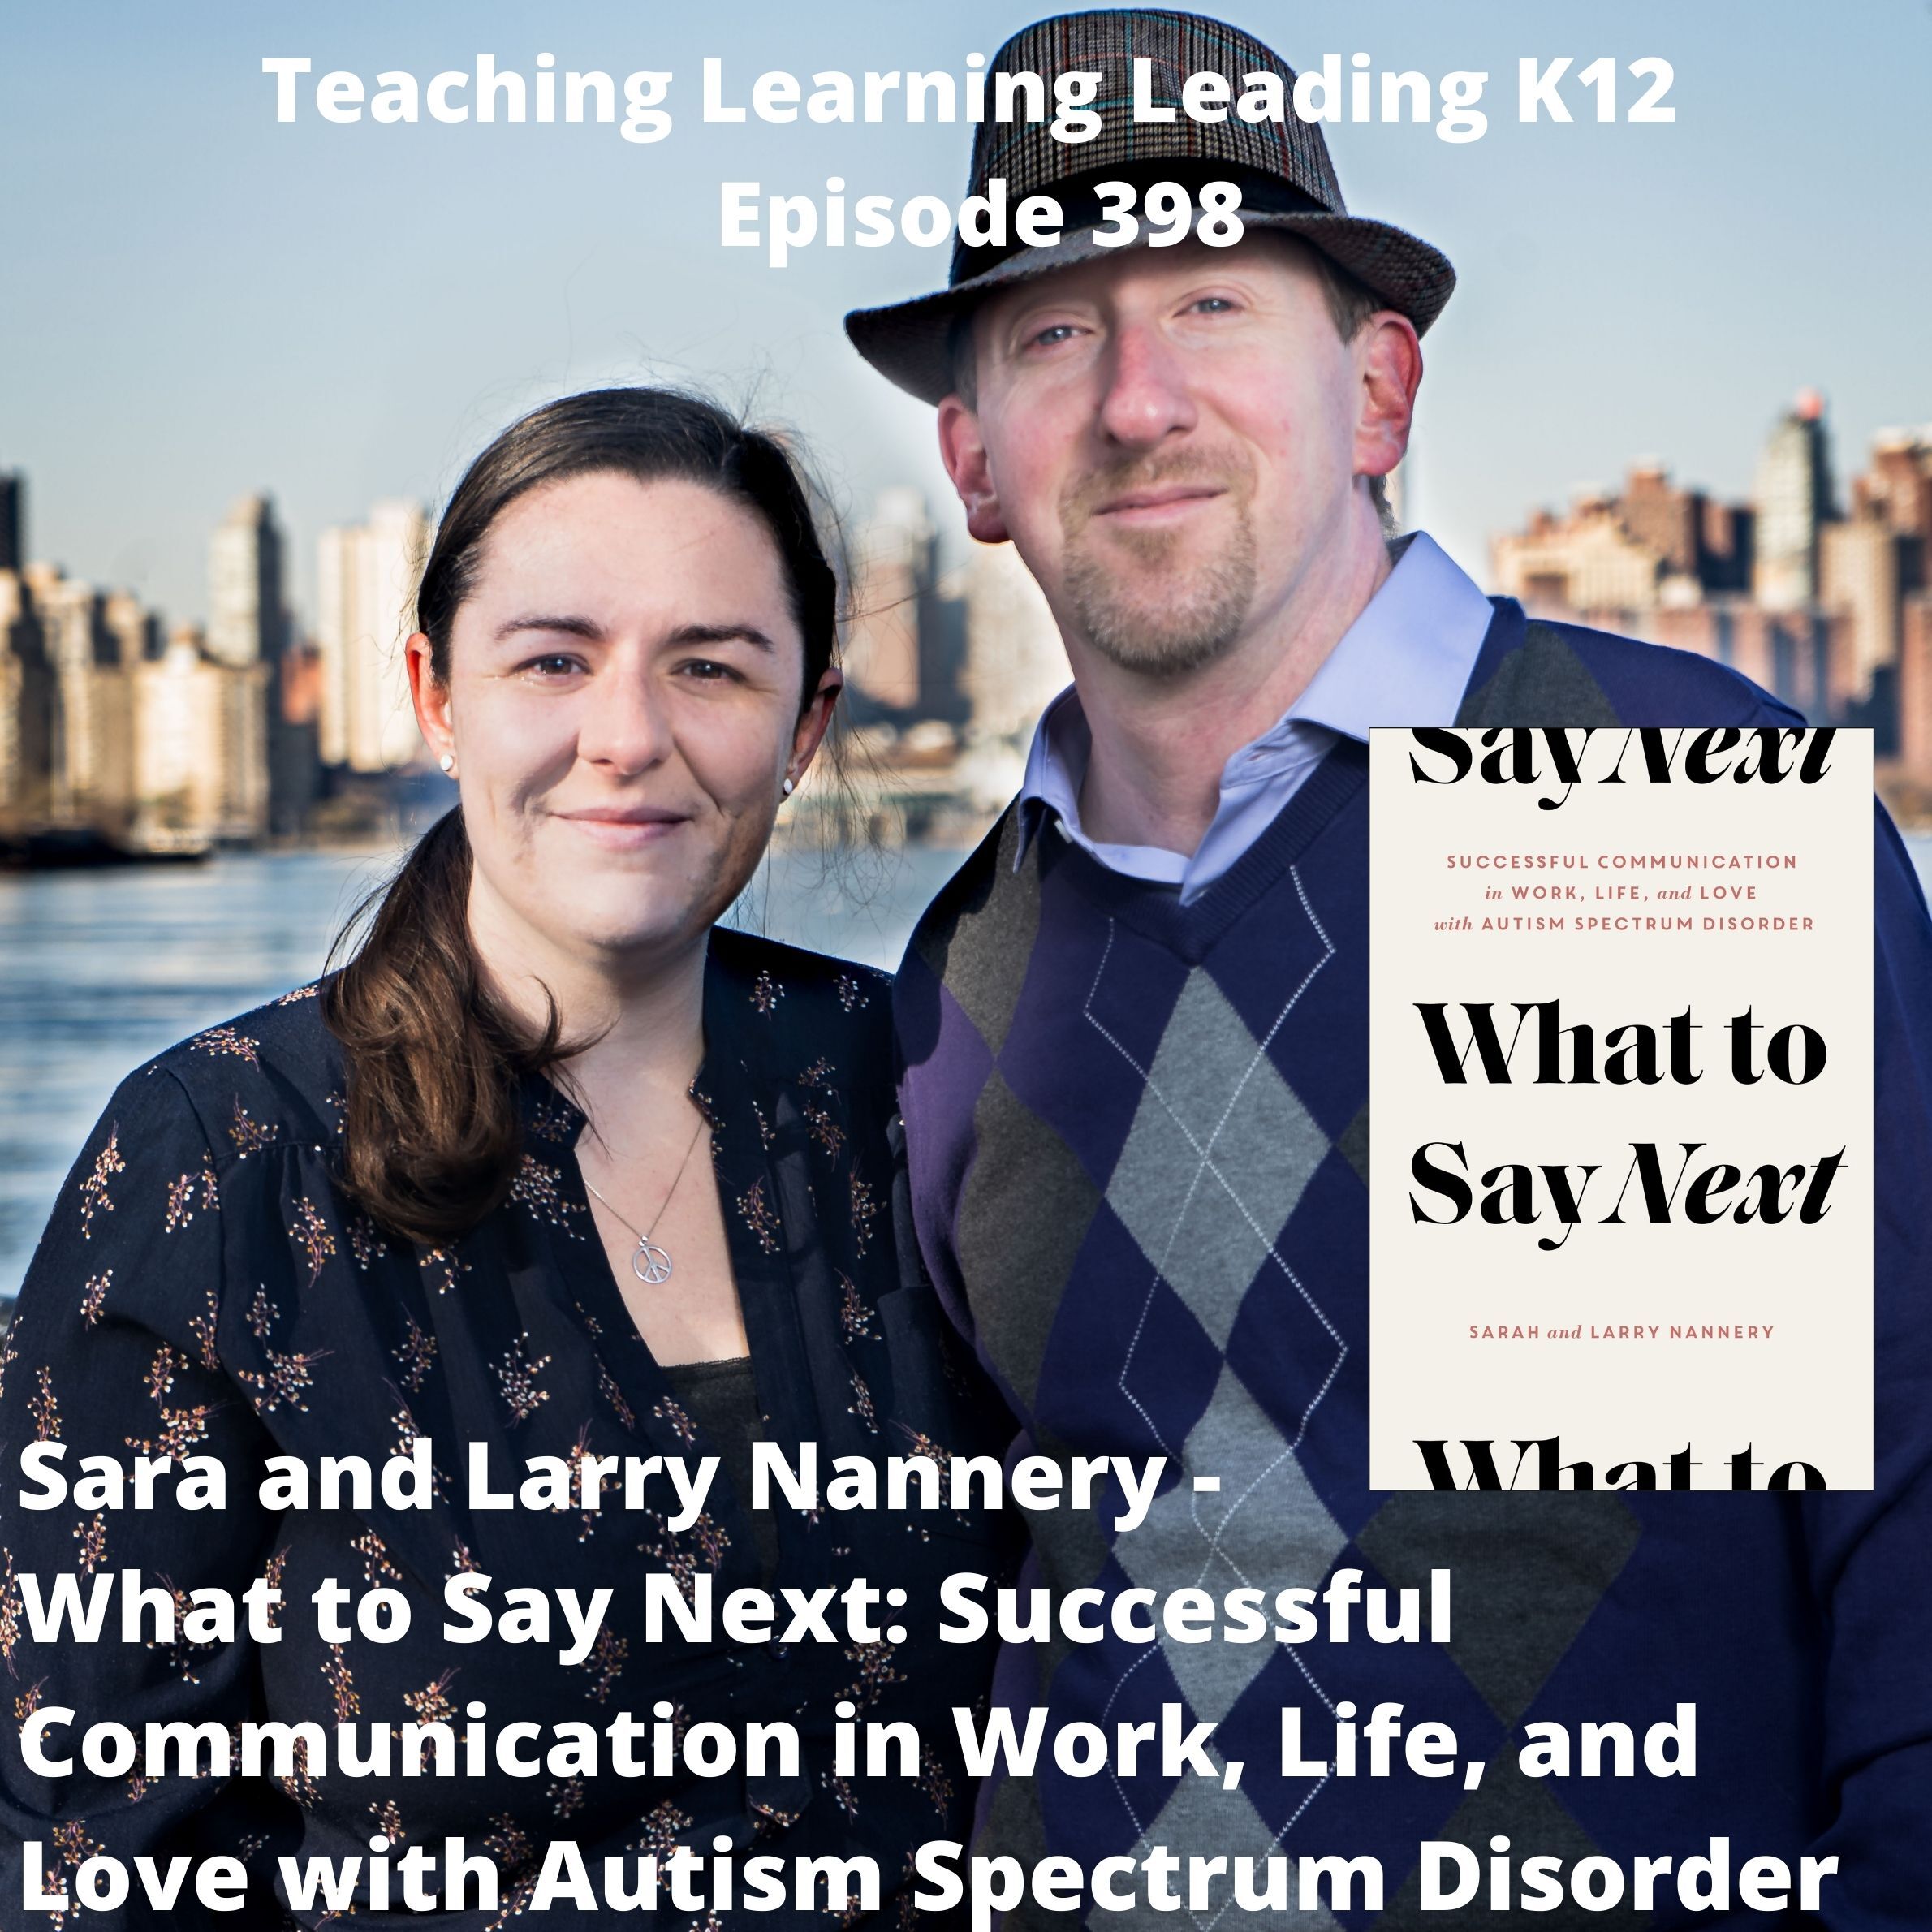 Sara and Larry Nannery - What to Say Next: Successful Communication in Work, Life, and Love with Autism Spectrum Disorder - 398